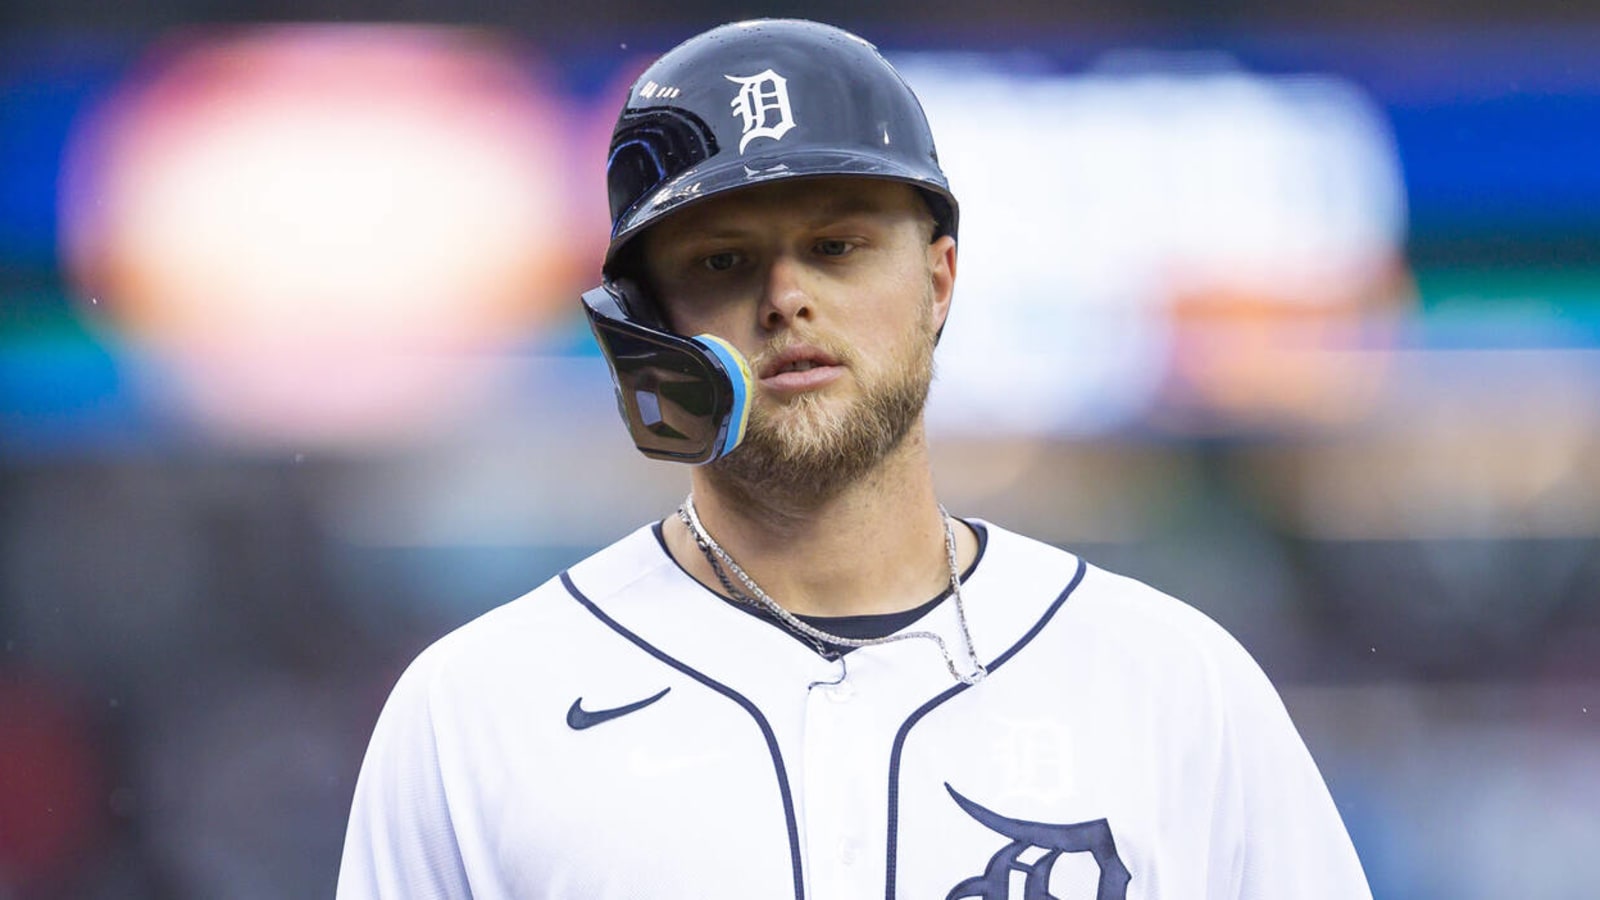 Tigers' Meadows to miss rest of season to address mental health